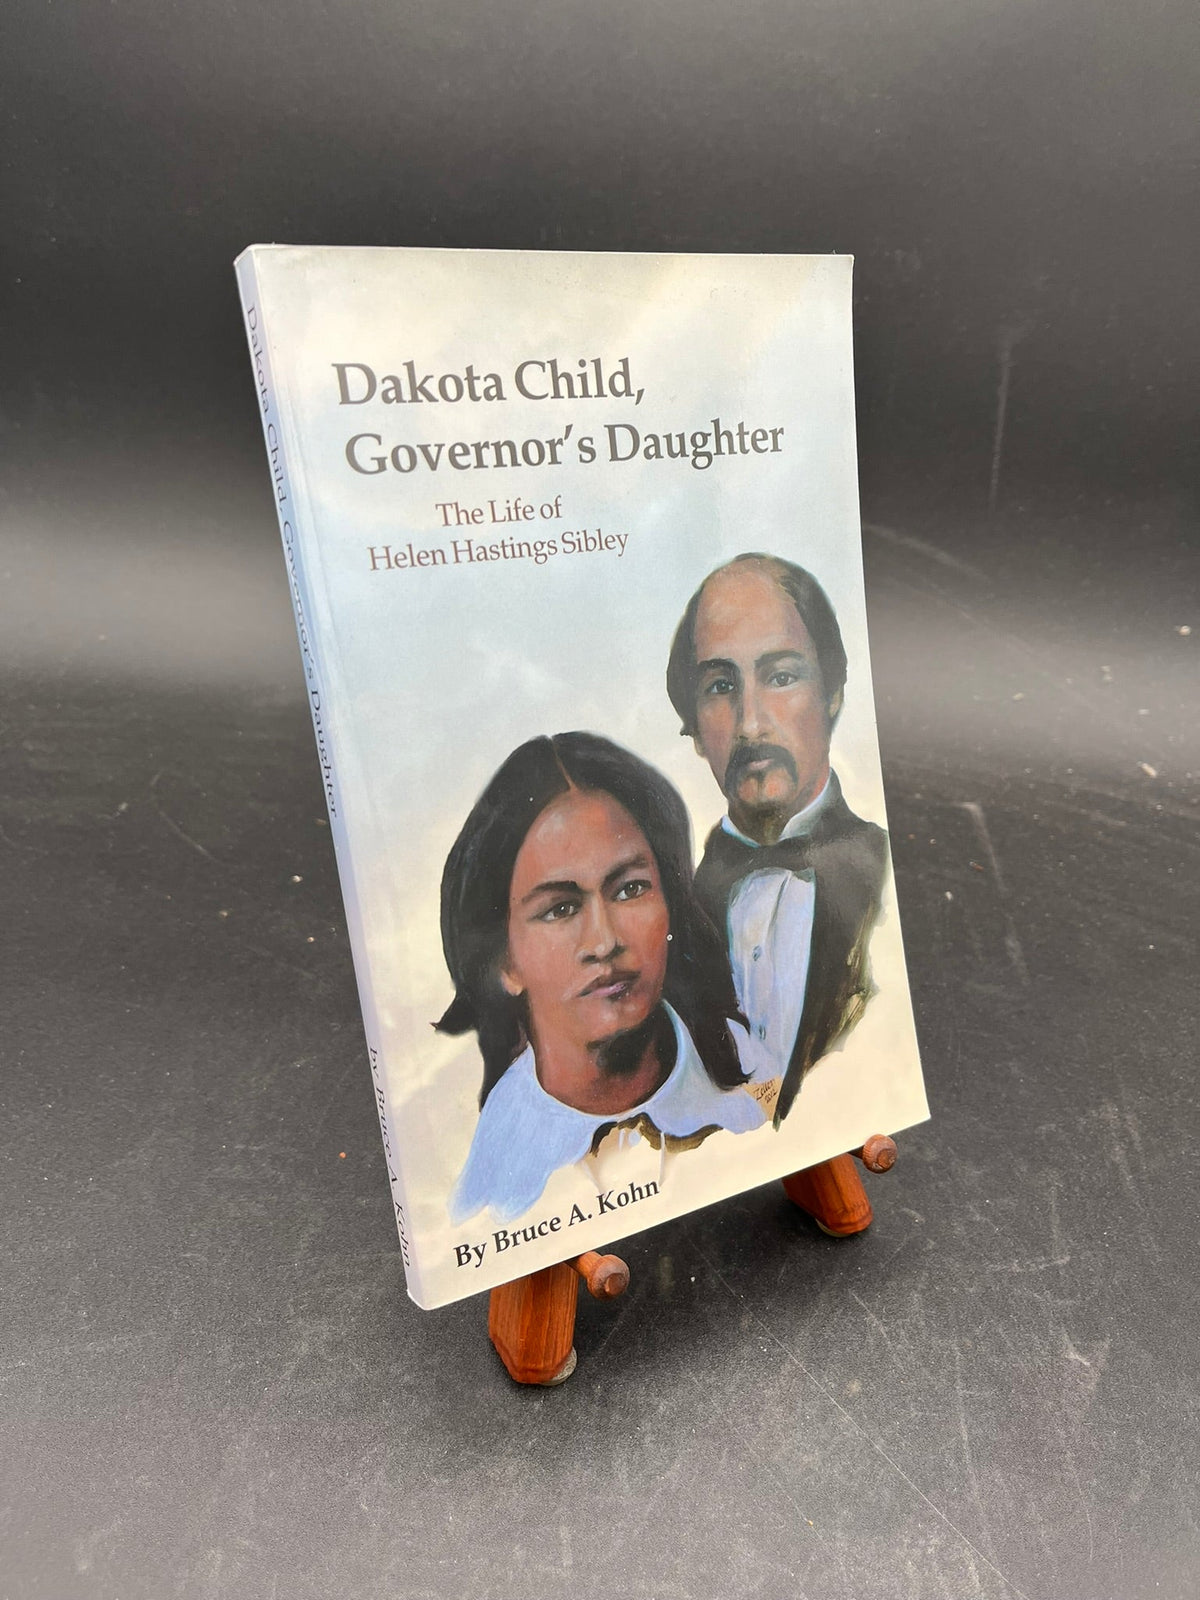 Dakota Child, Governor's Daughter : The Life of Helen Hastings Sibley